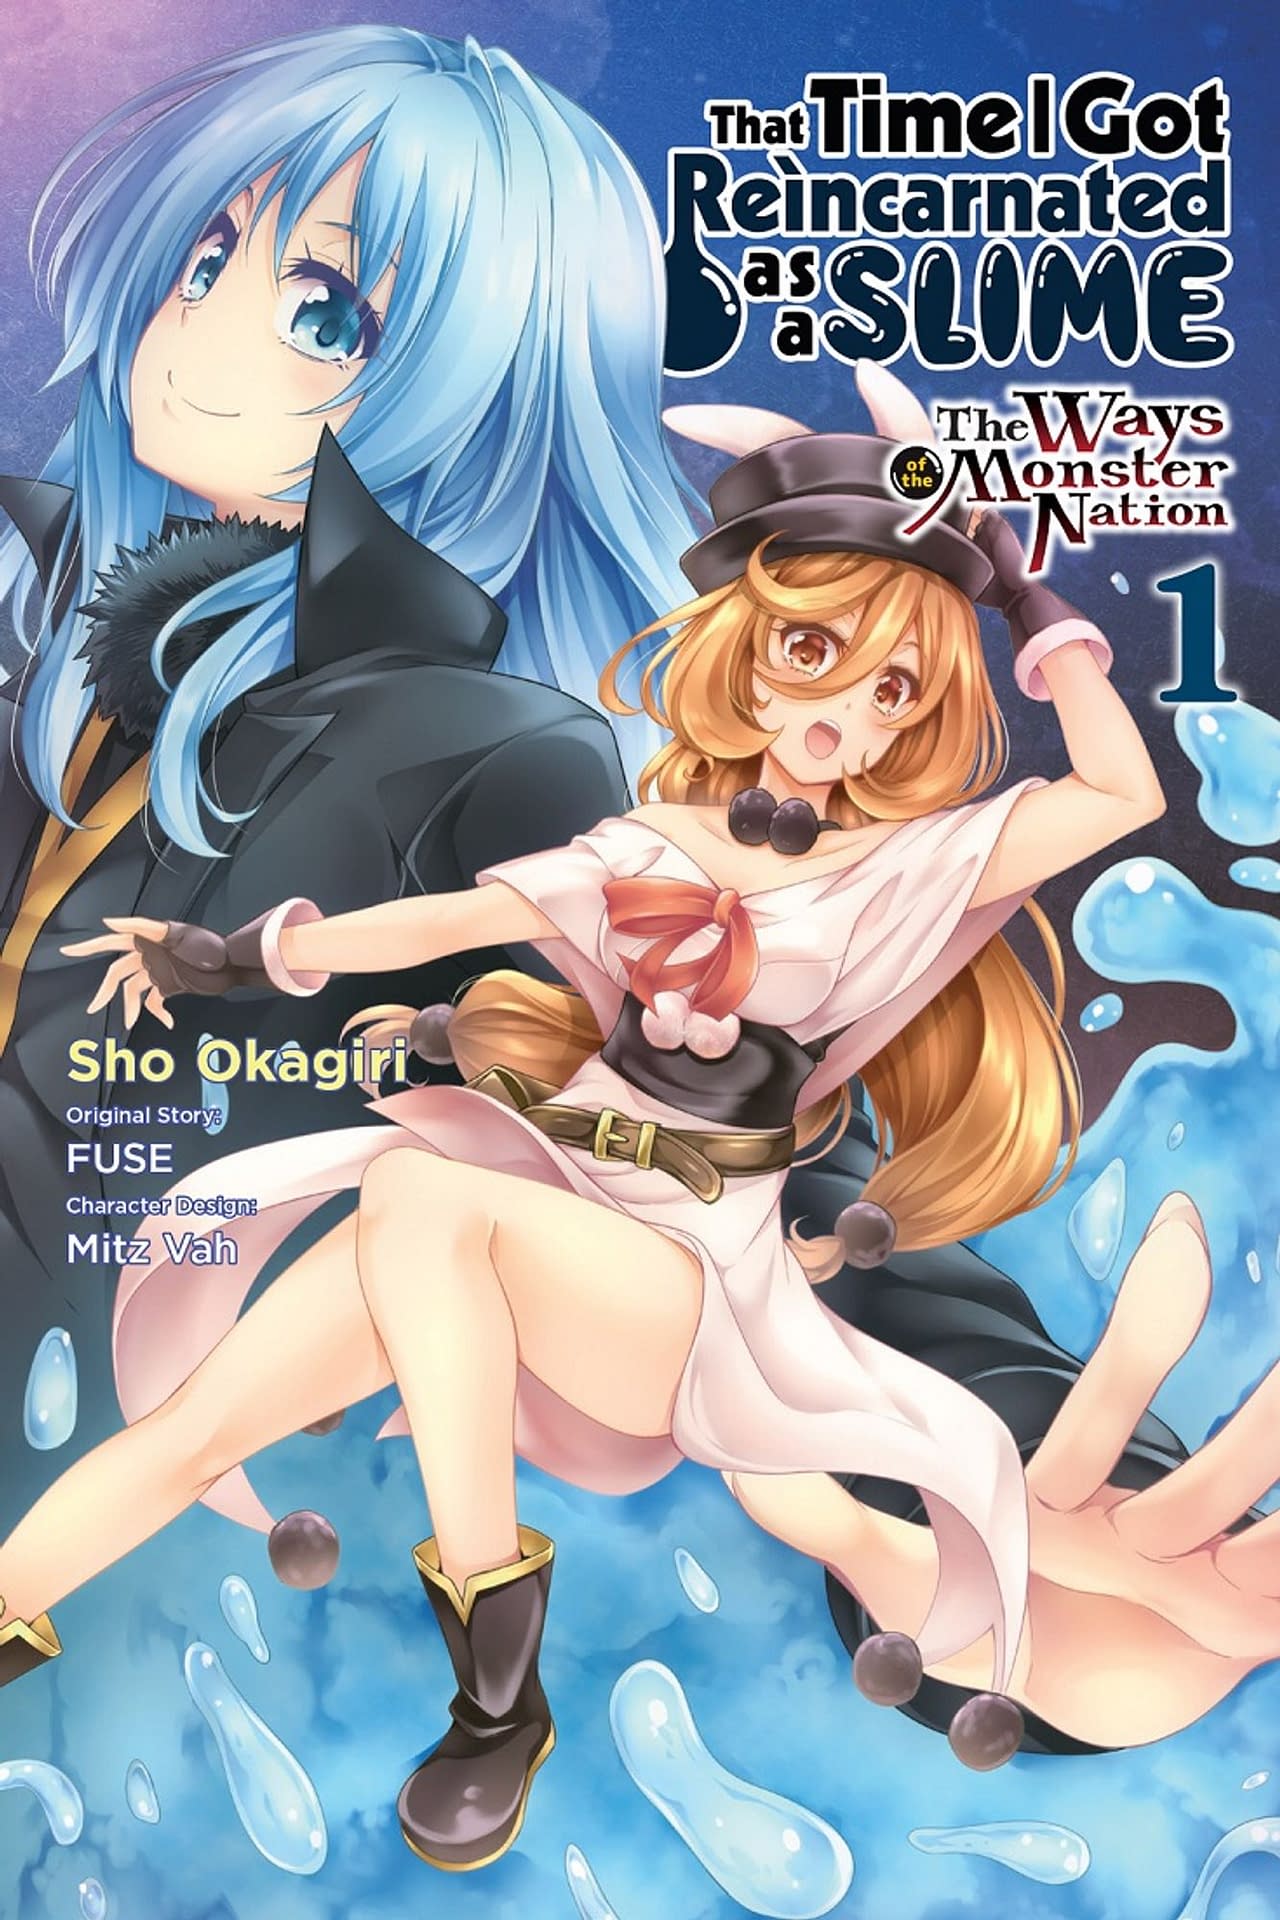 Yen Press Launches New That Time I Got Reincarnated as a Slime Manga